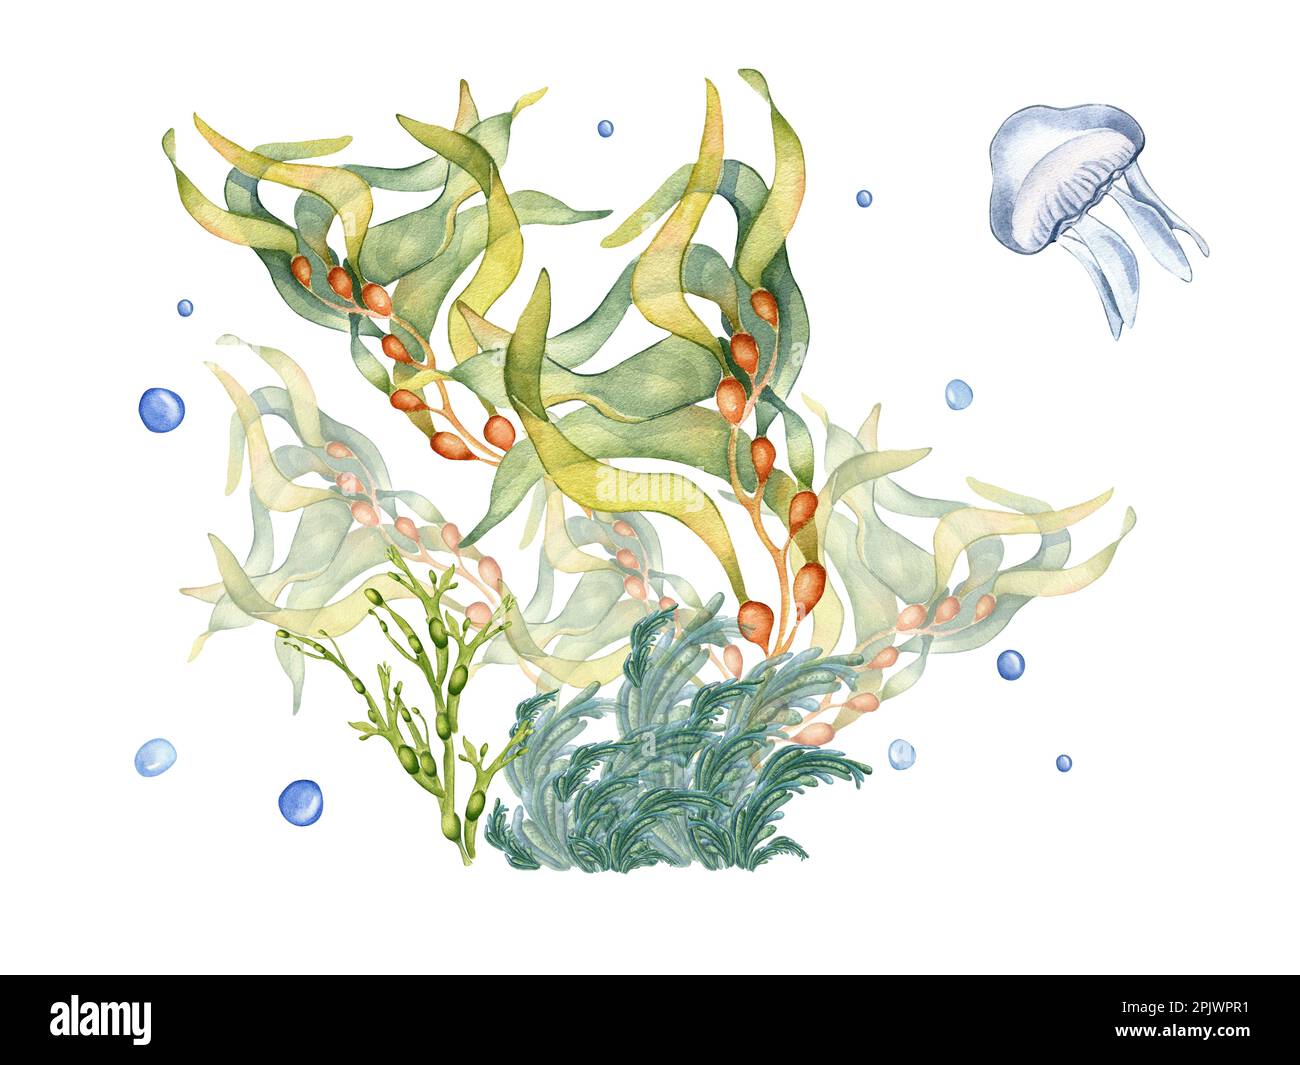 Composition of colorful sea plants watercolor illustration isolated on white. Laminaria, kelp,spirulina seaweeds hand drawn. Design element for signbo Stock Photo